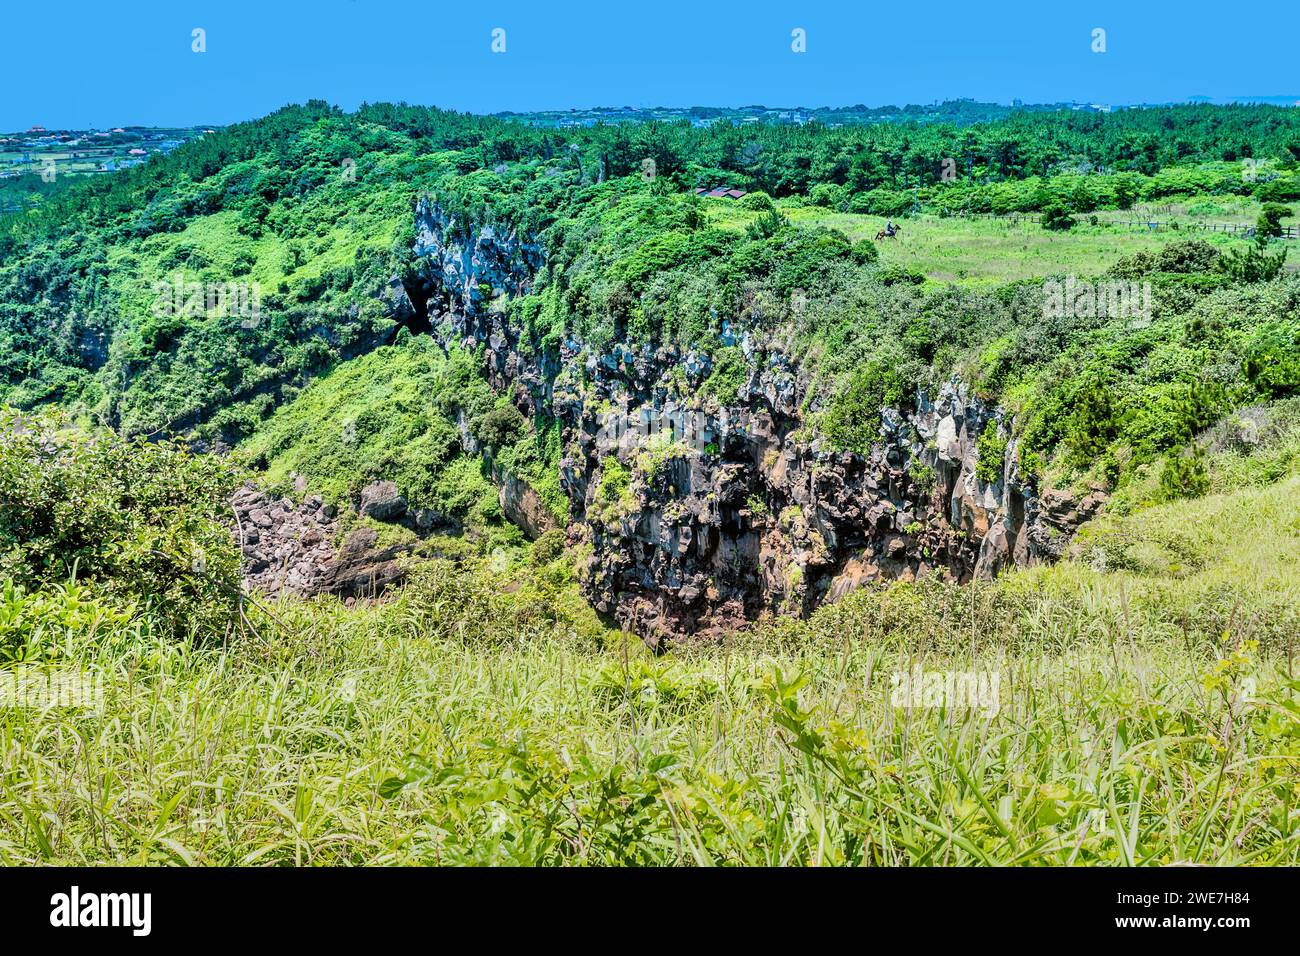 Craggy cliff wall in mountainous region of wilderness park Stock Photo